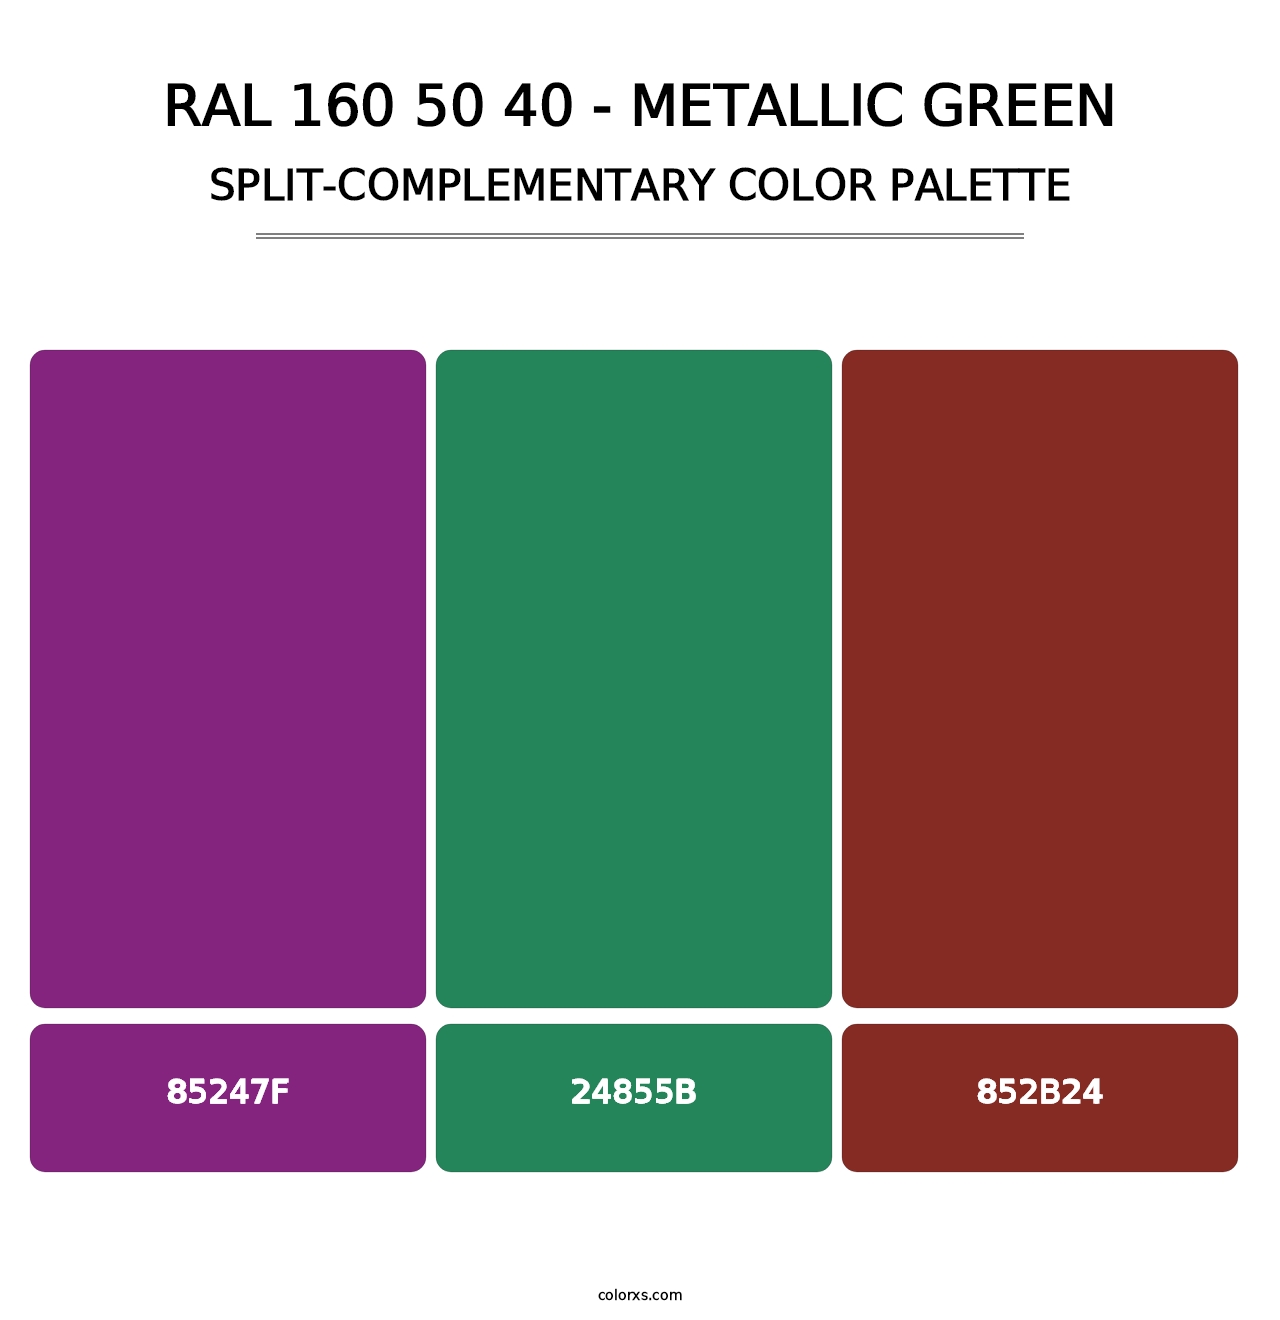 RAL 160 50 40 - Metallic Green - Split-Complementary Color Palette